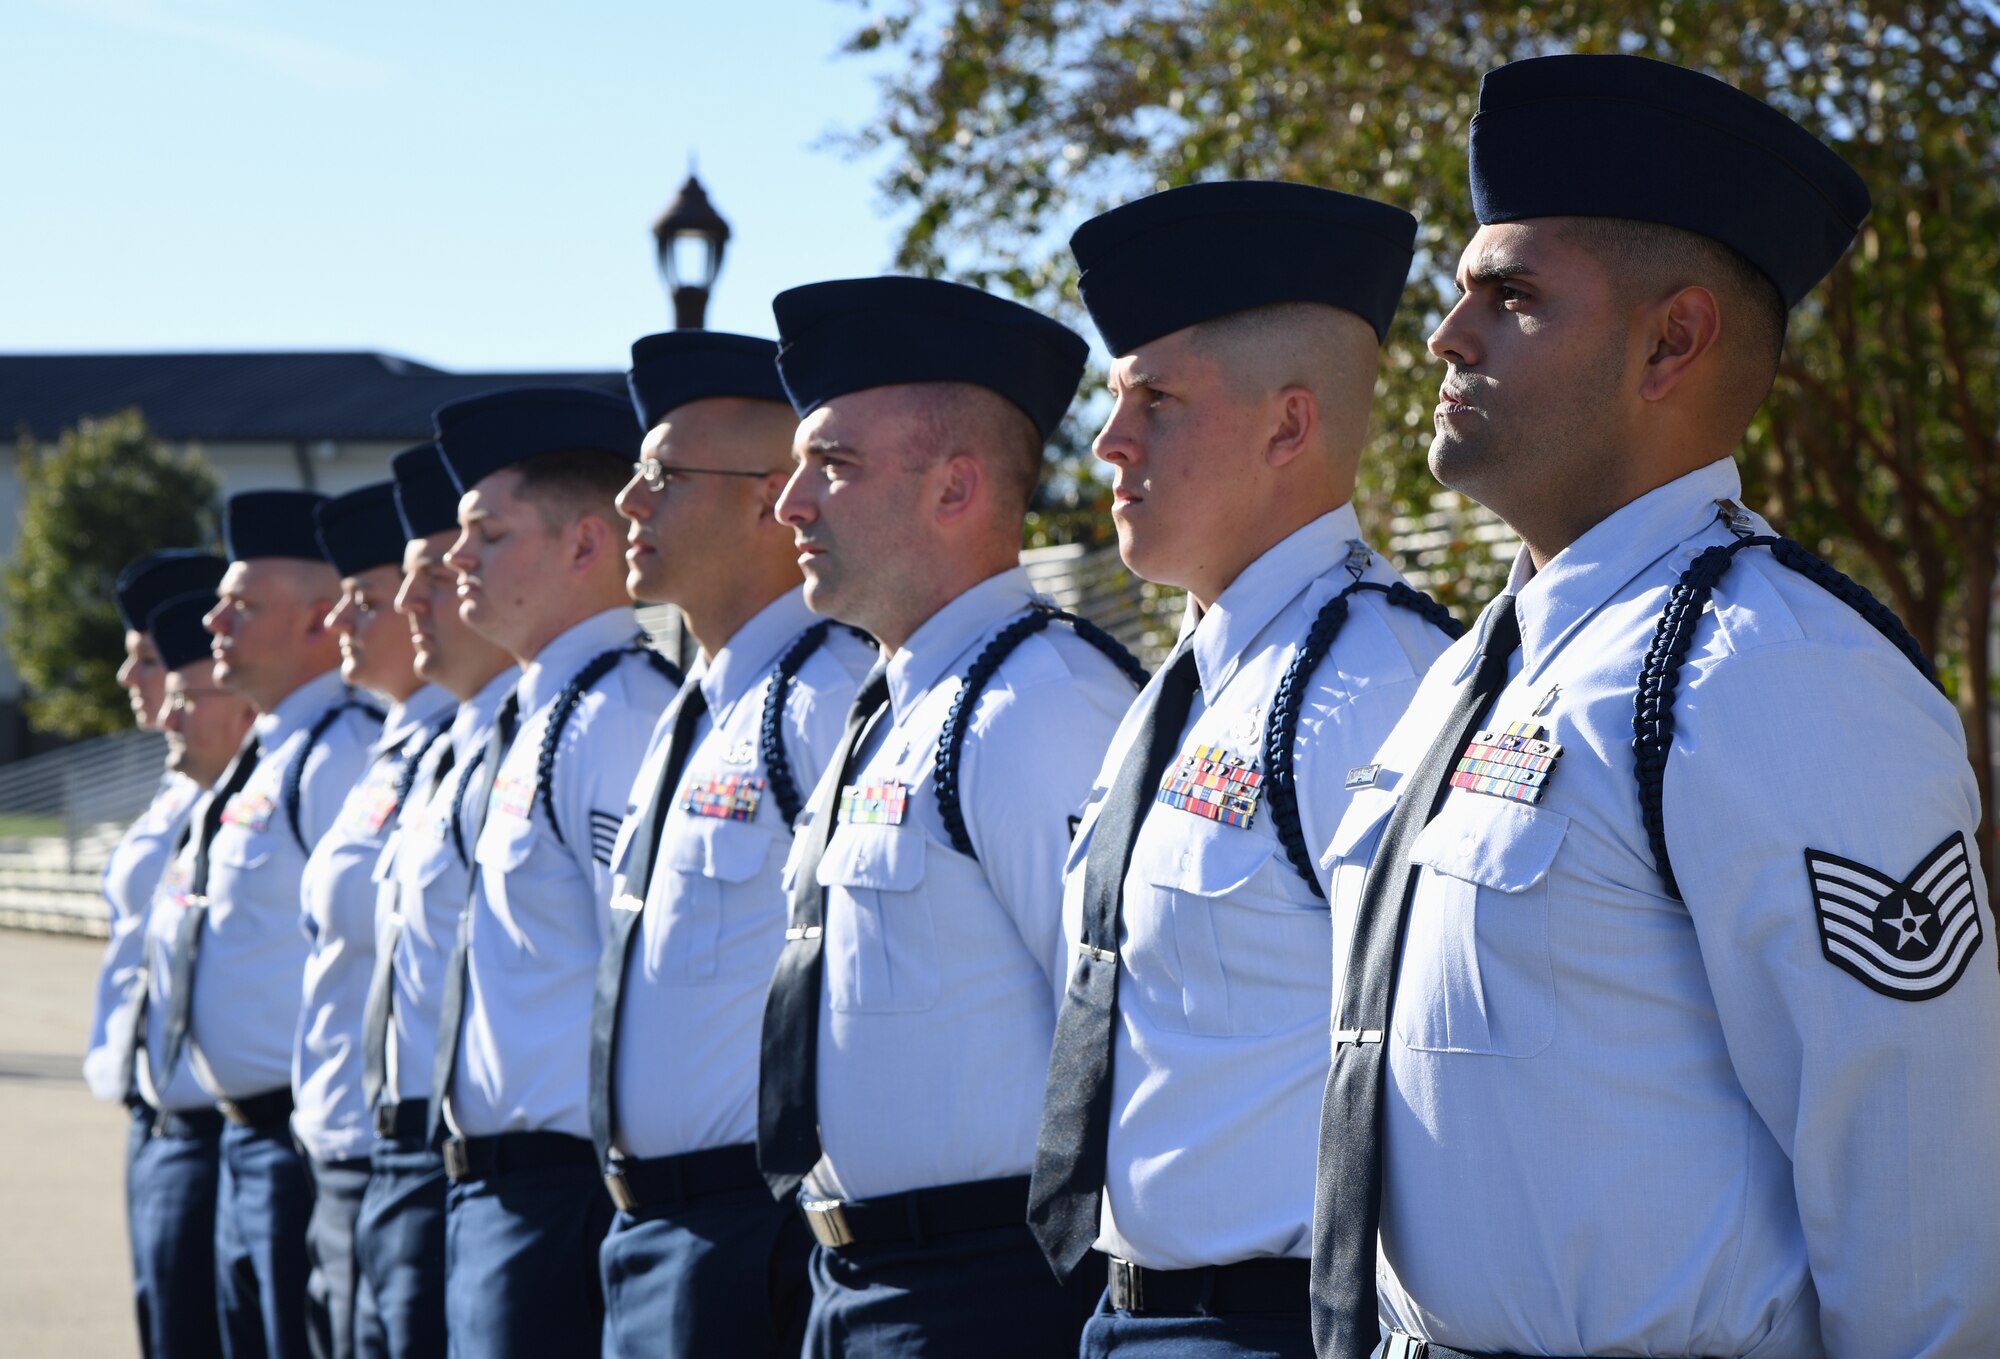 Airmen stand in formation during a Military Training Leader course graduation ceremony at the Levitow Training Support Facility at Keesler Air Force Base, Mississippi, Oct. 31, 2019. The MTL course is responsible for training approximately 120 MTLs per year. Those MTLs are then responsible for training approximately 200,000 Airmen in 49 different locations that fall under Air Education and Training Command. (U.S. Air Force photo by Kemberly Groue)